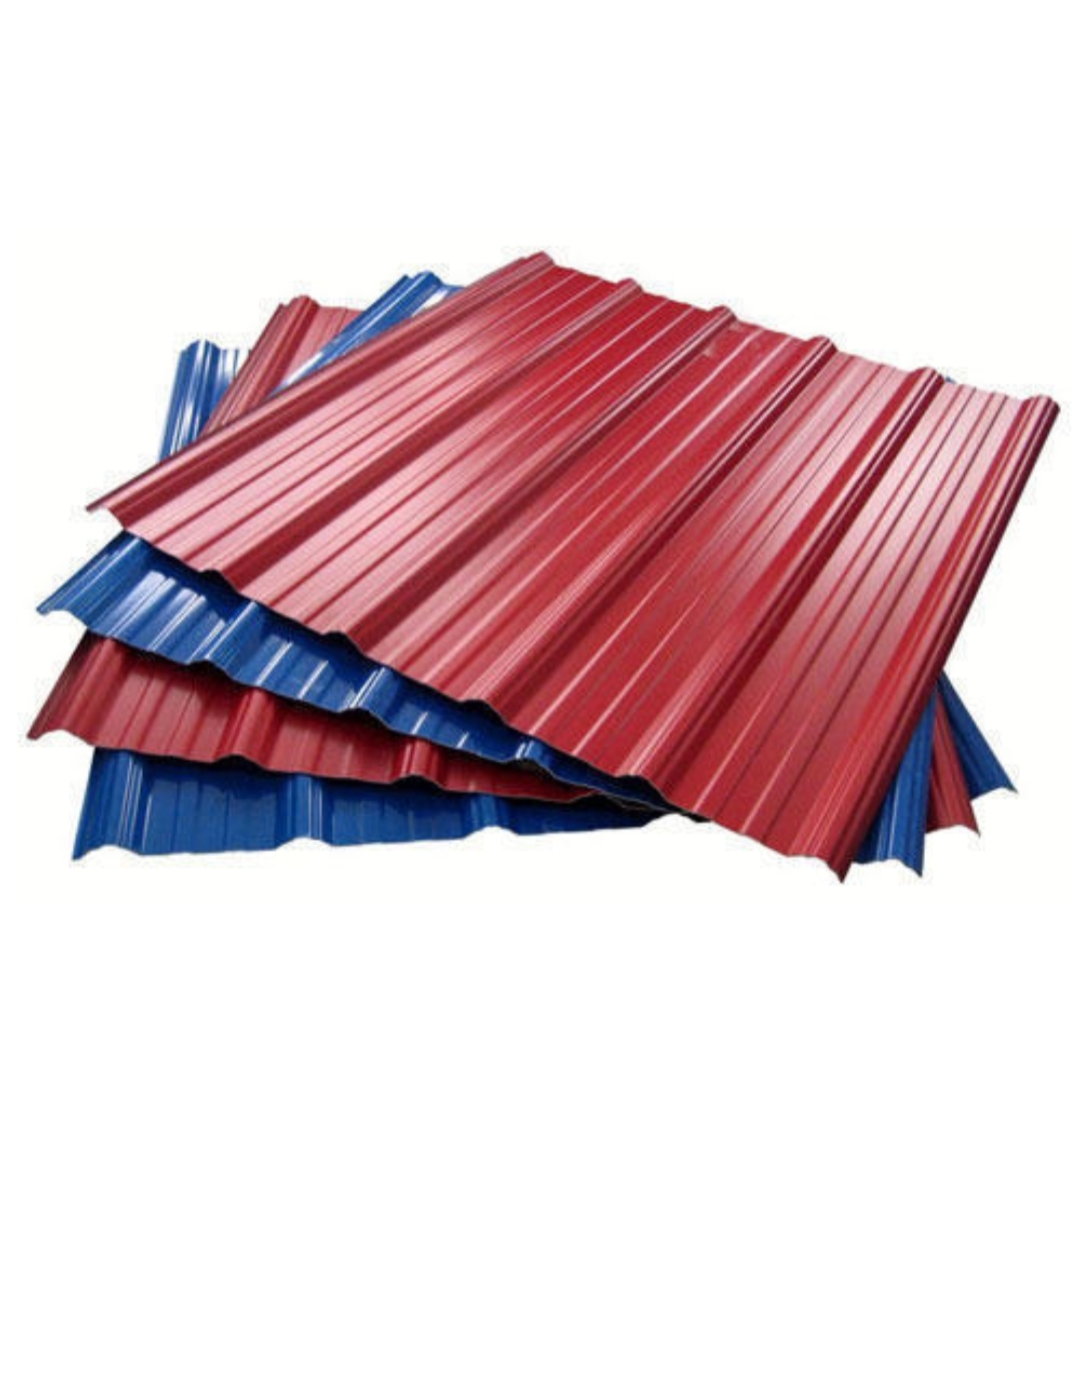 pvc-roofing-sheet